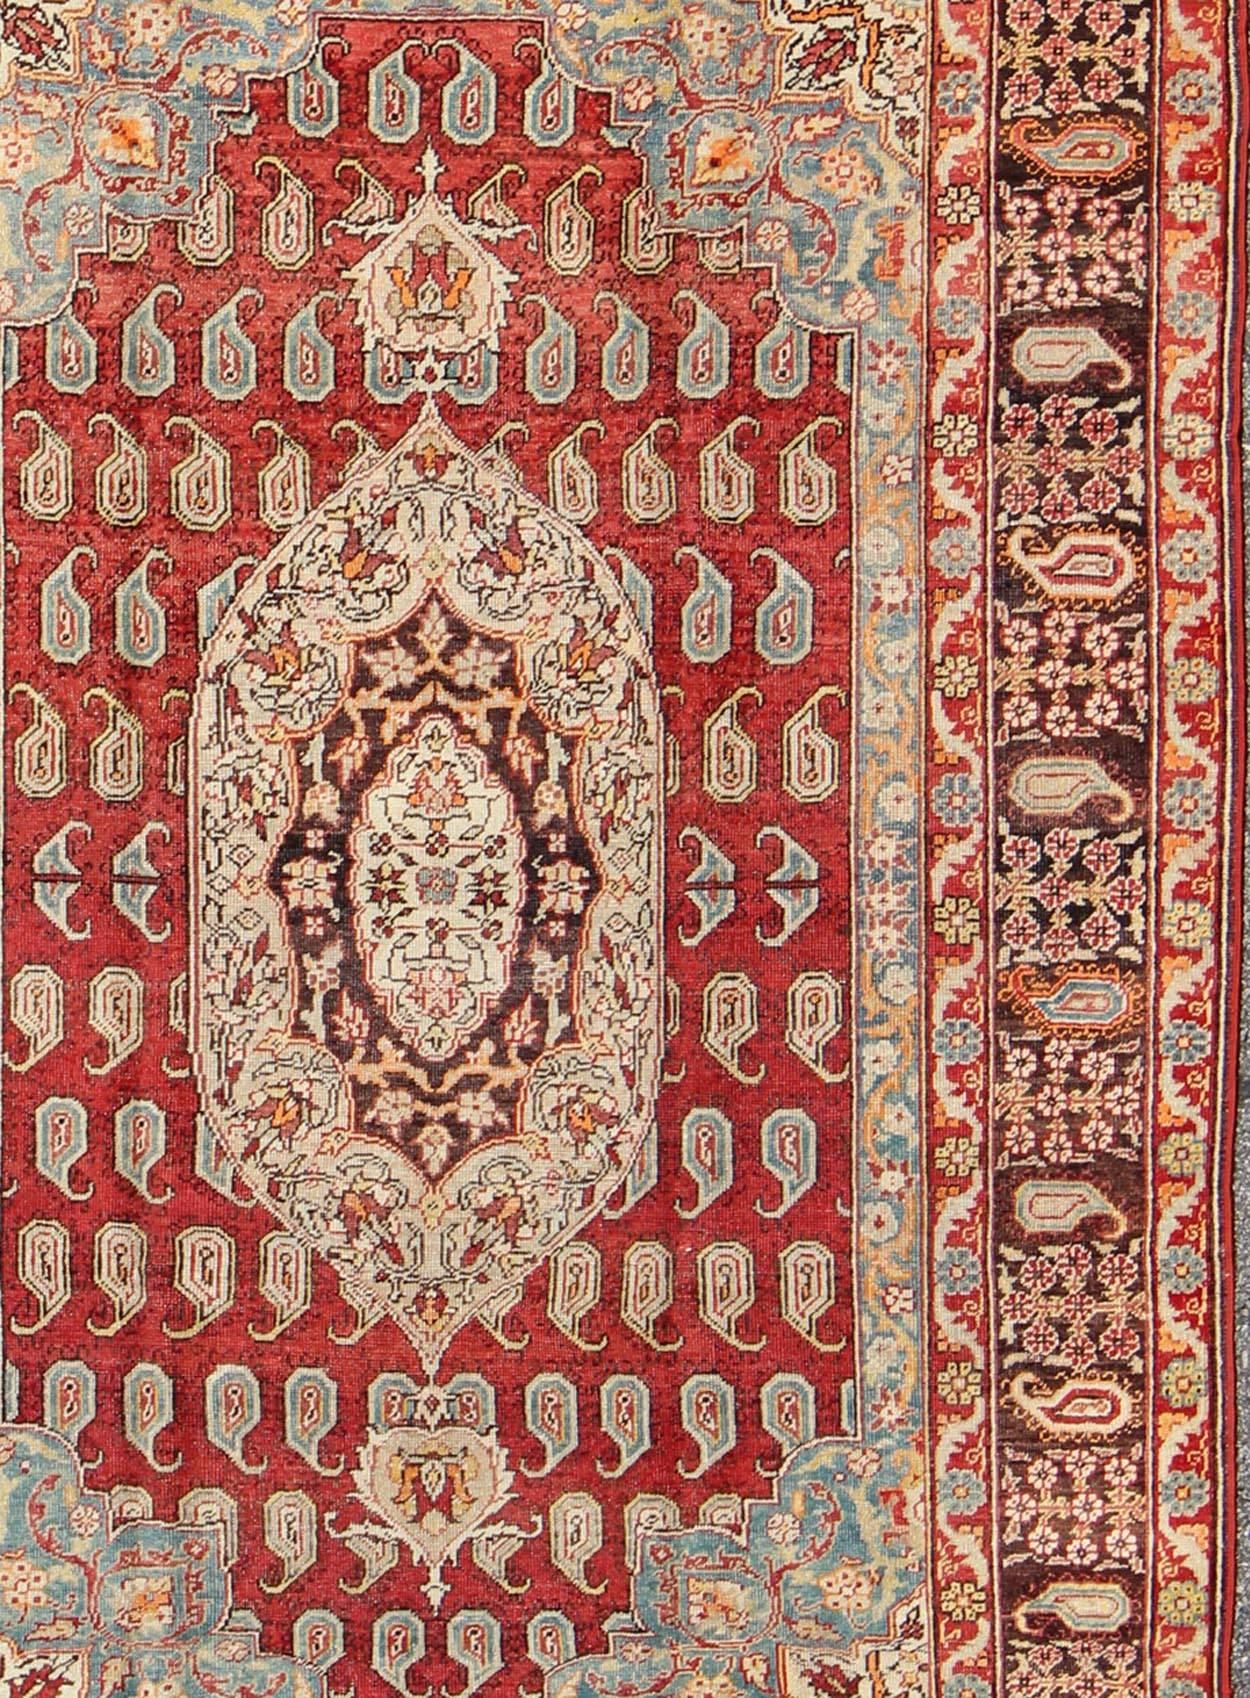 20th Century Antique Turkish Oushak Rug with Paisley Design in Red, Brown and Blue For Sale